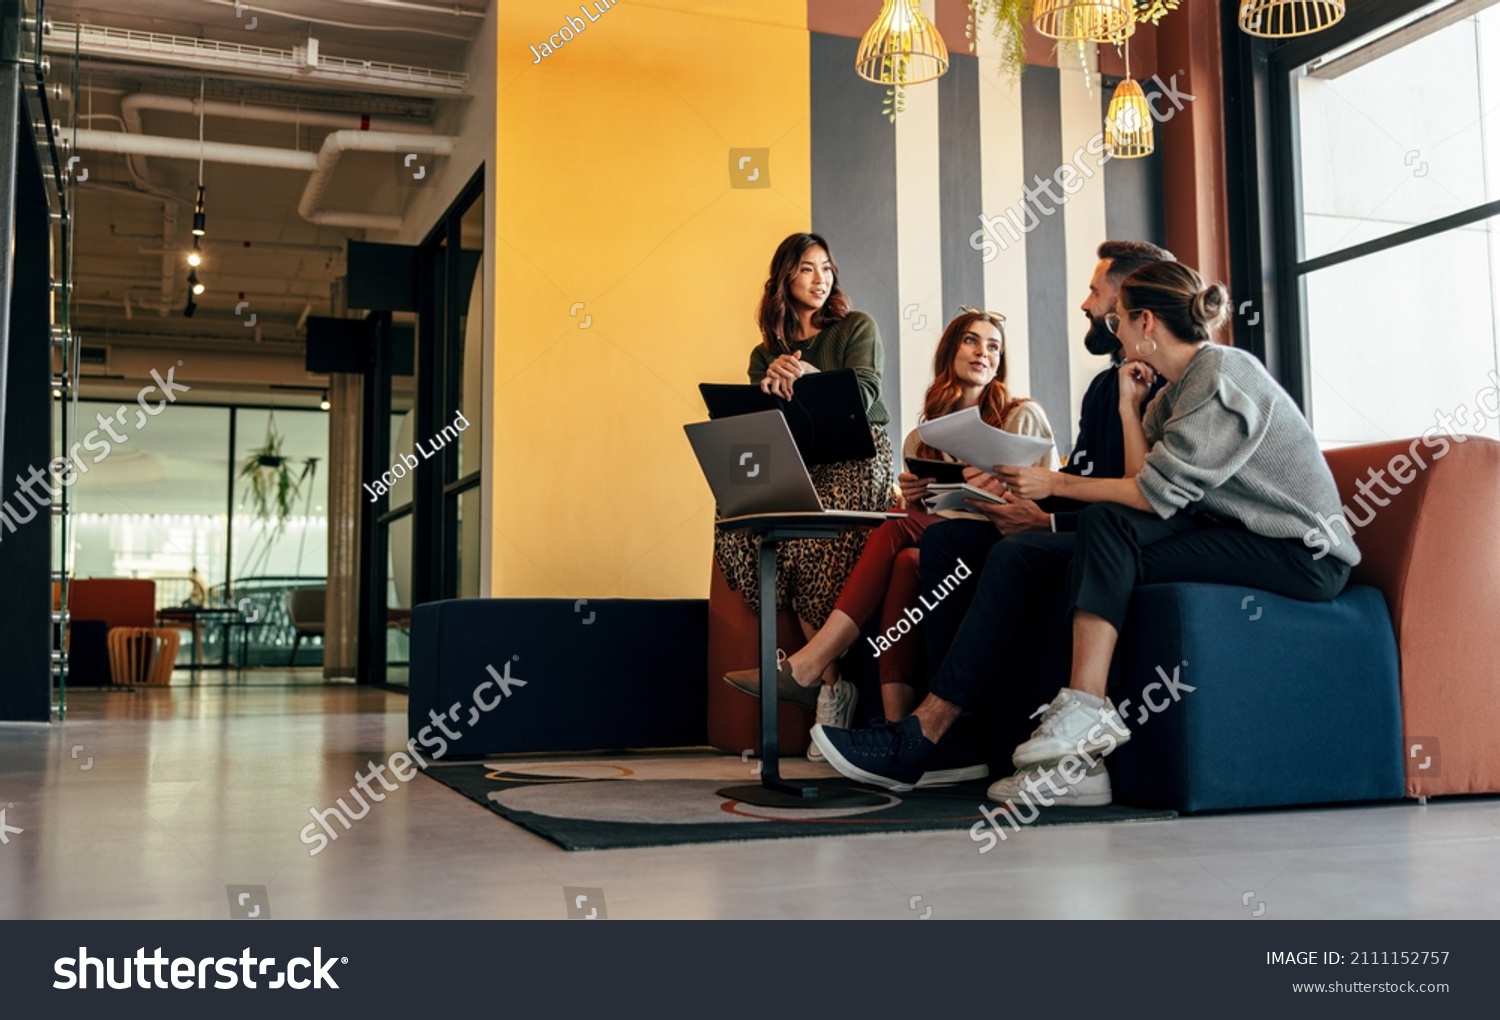 Diverse businesspeople working in an office lobby. Group of happy businesspeople having a discussion while sitting together in a co-working space. Young entrepreneurs collaborating on a new project. #2111152757